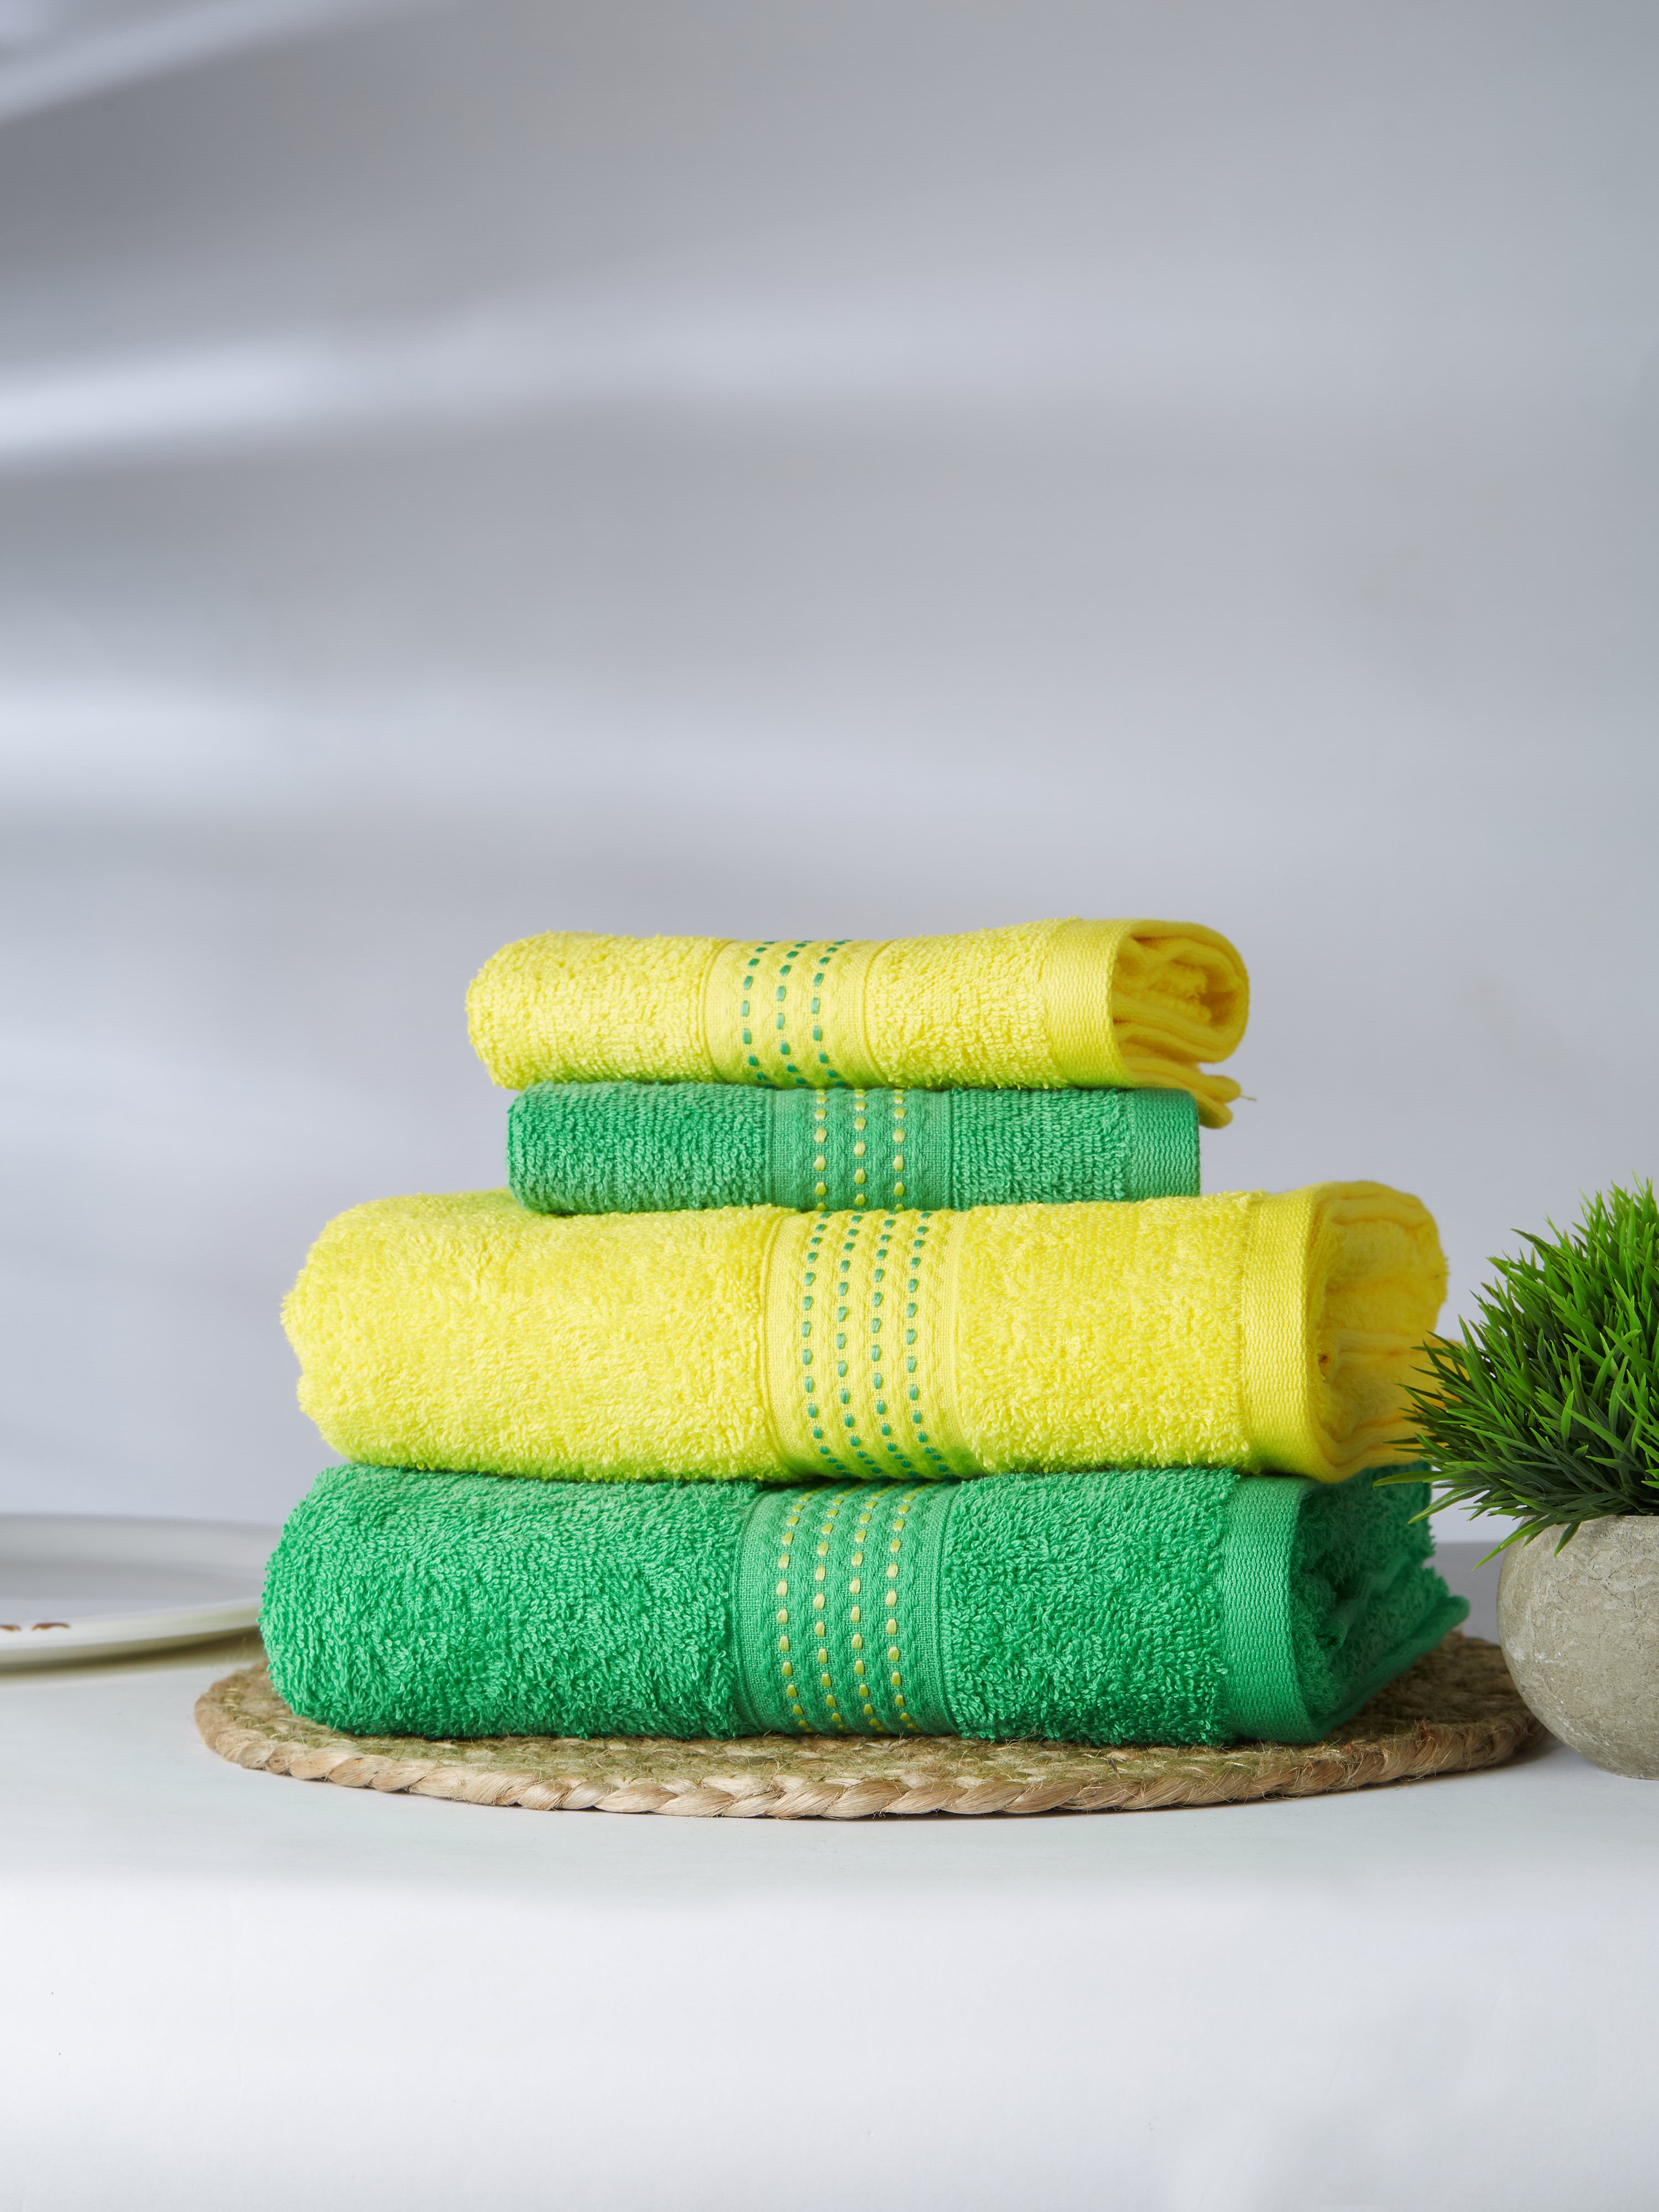 Towels Online - All you need to know about Towels